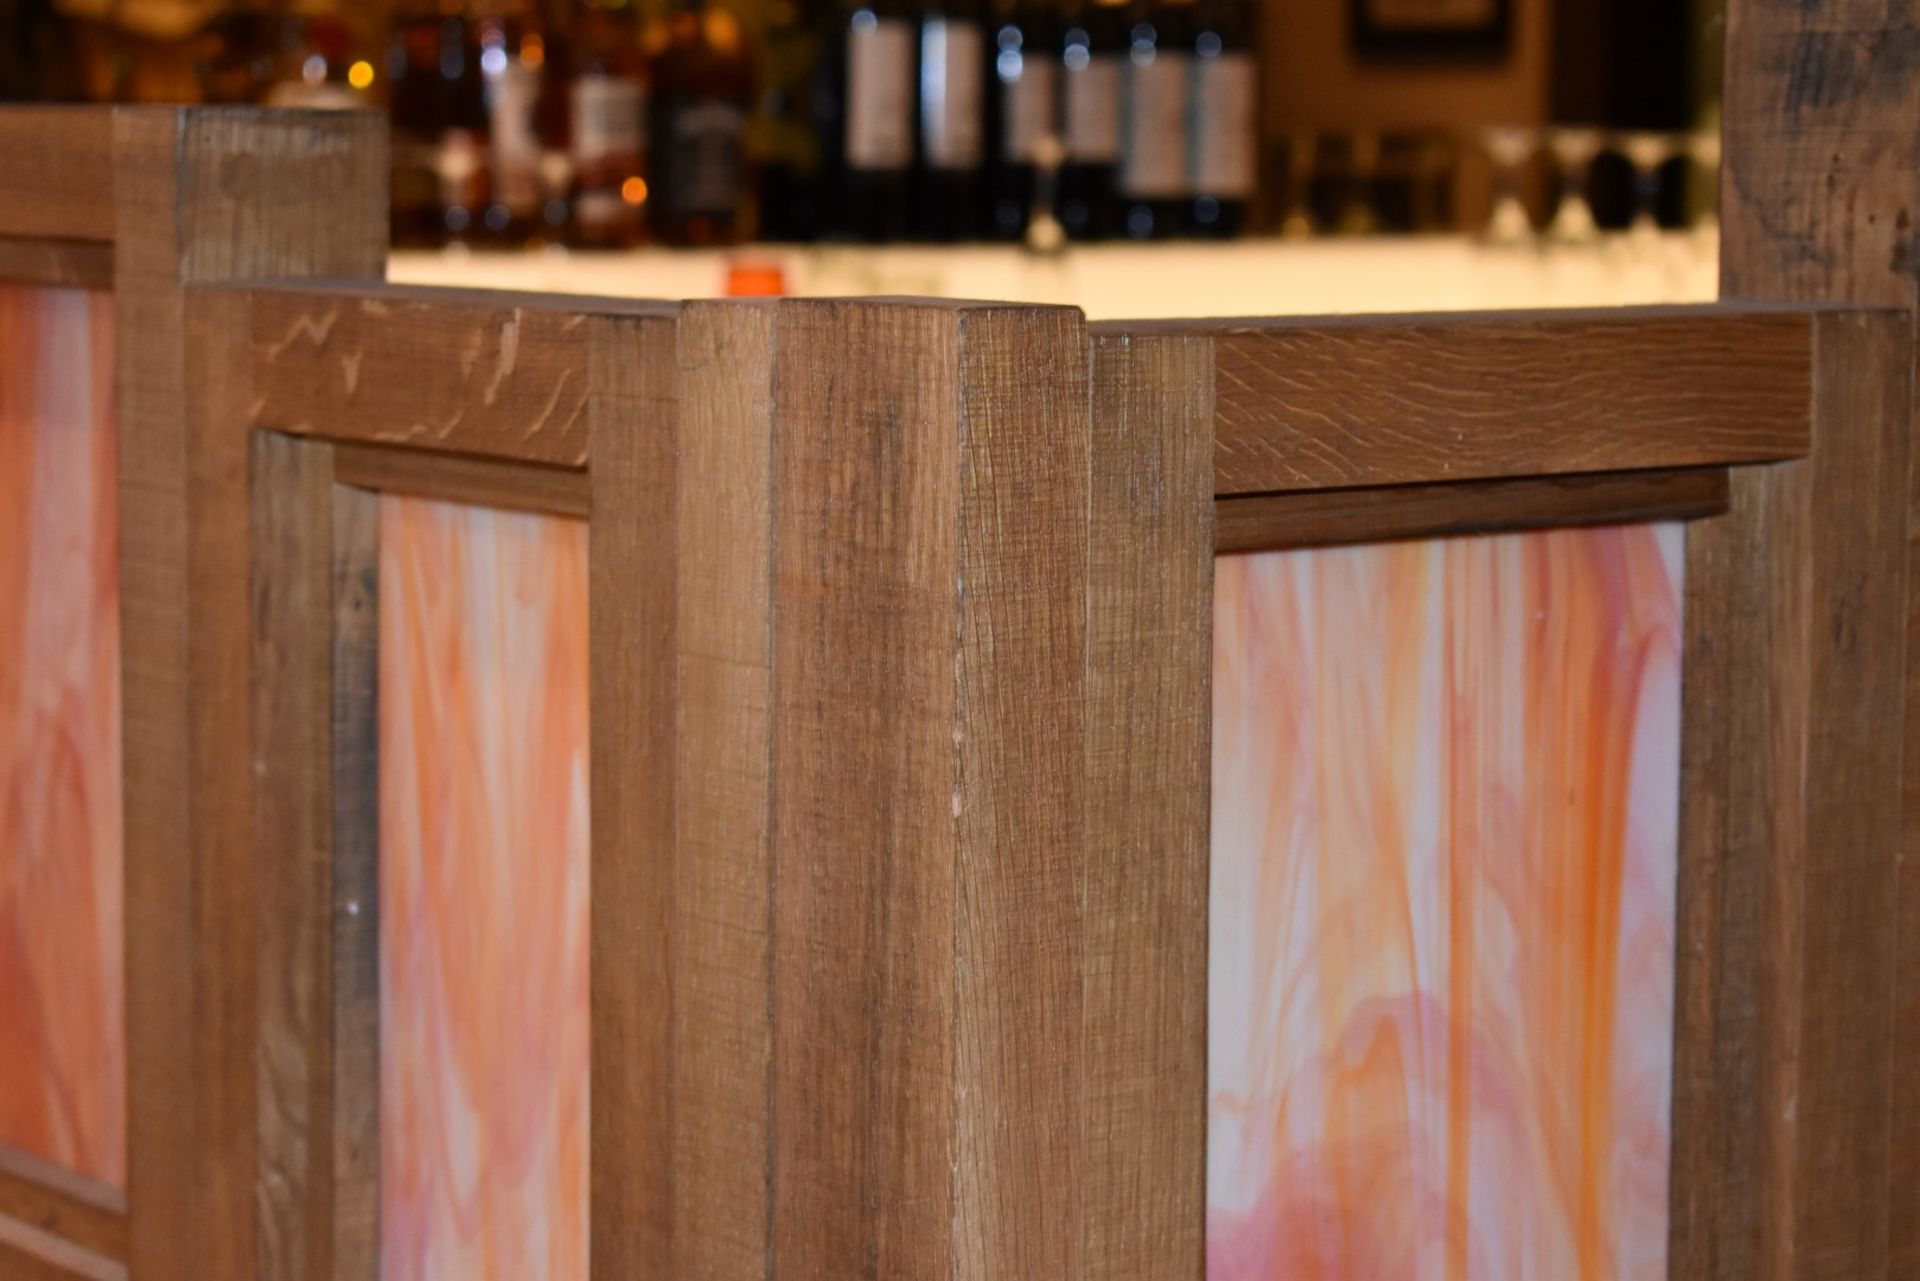 1 x L-Shaped Privacy Divider Featuring Rustic Wooden Framing And Coloured Inlays - Image 3 of 9